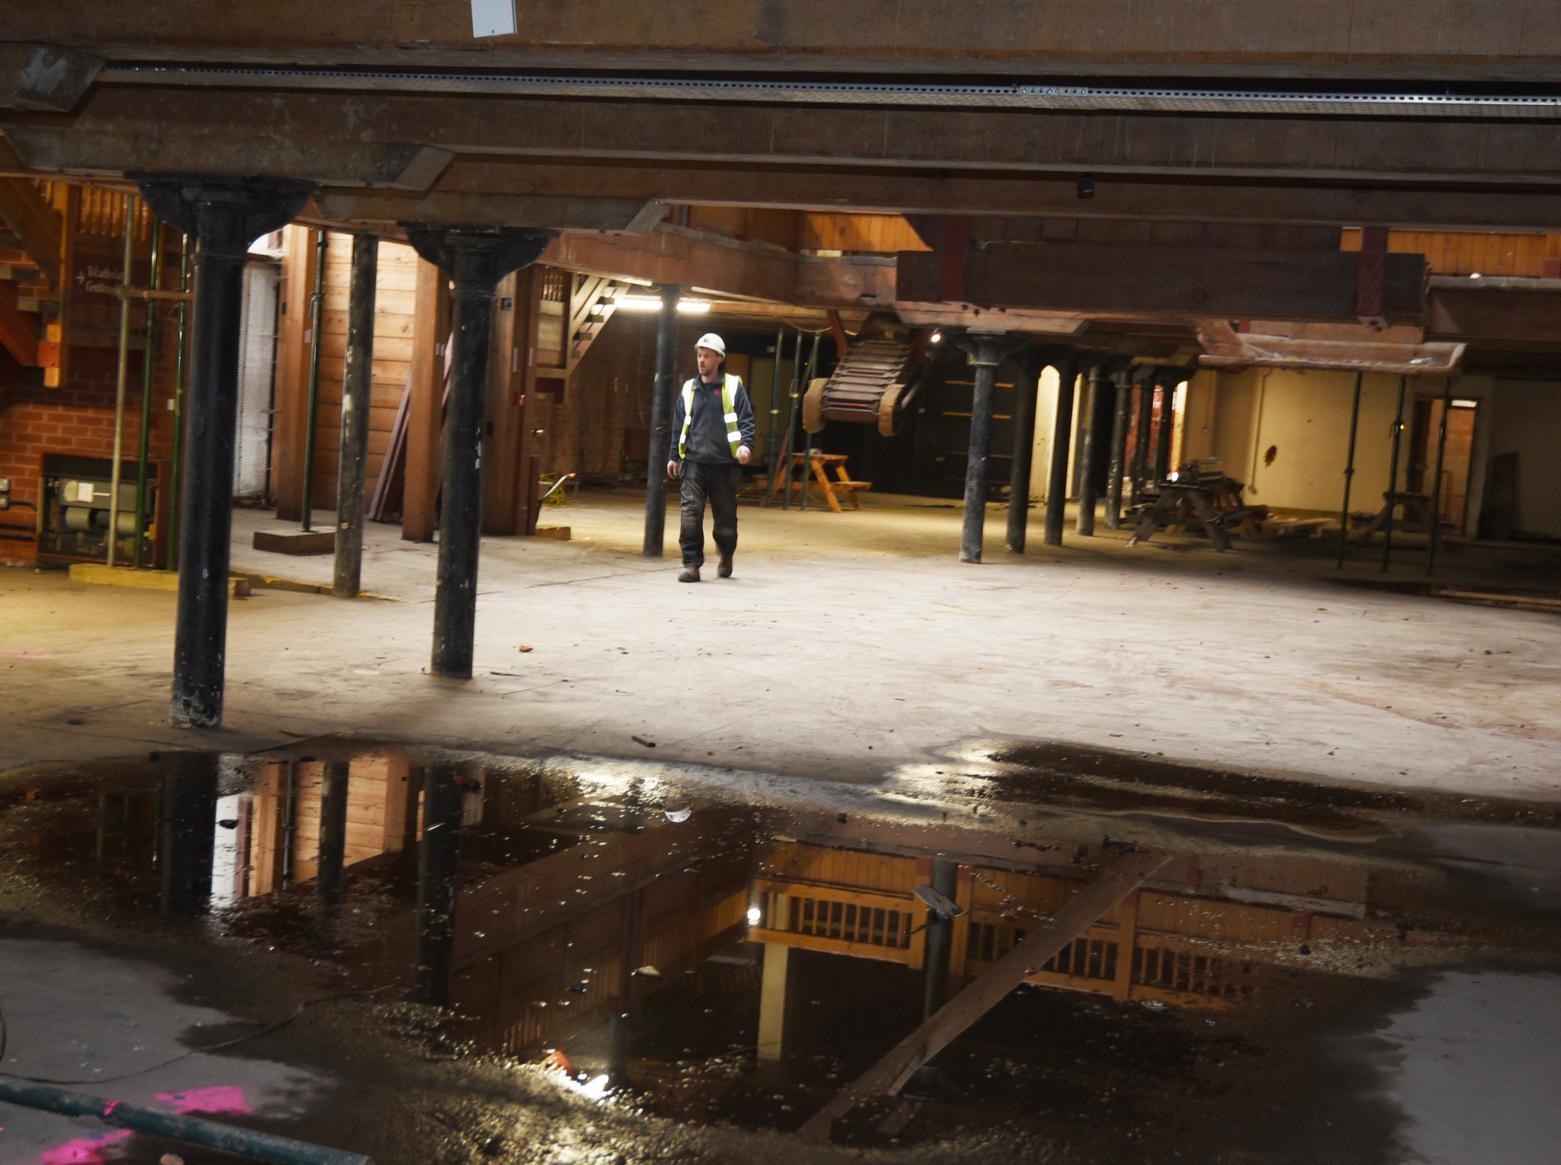 Inside the former The Way We Were Museum at the Wigan Pier redevelopment